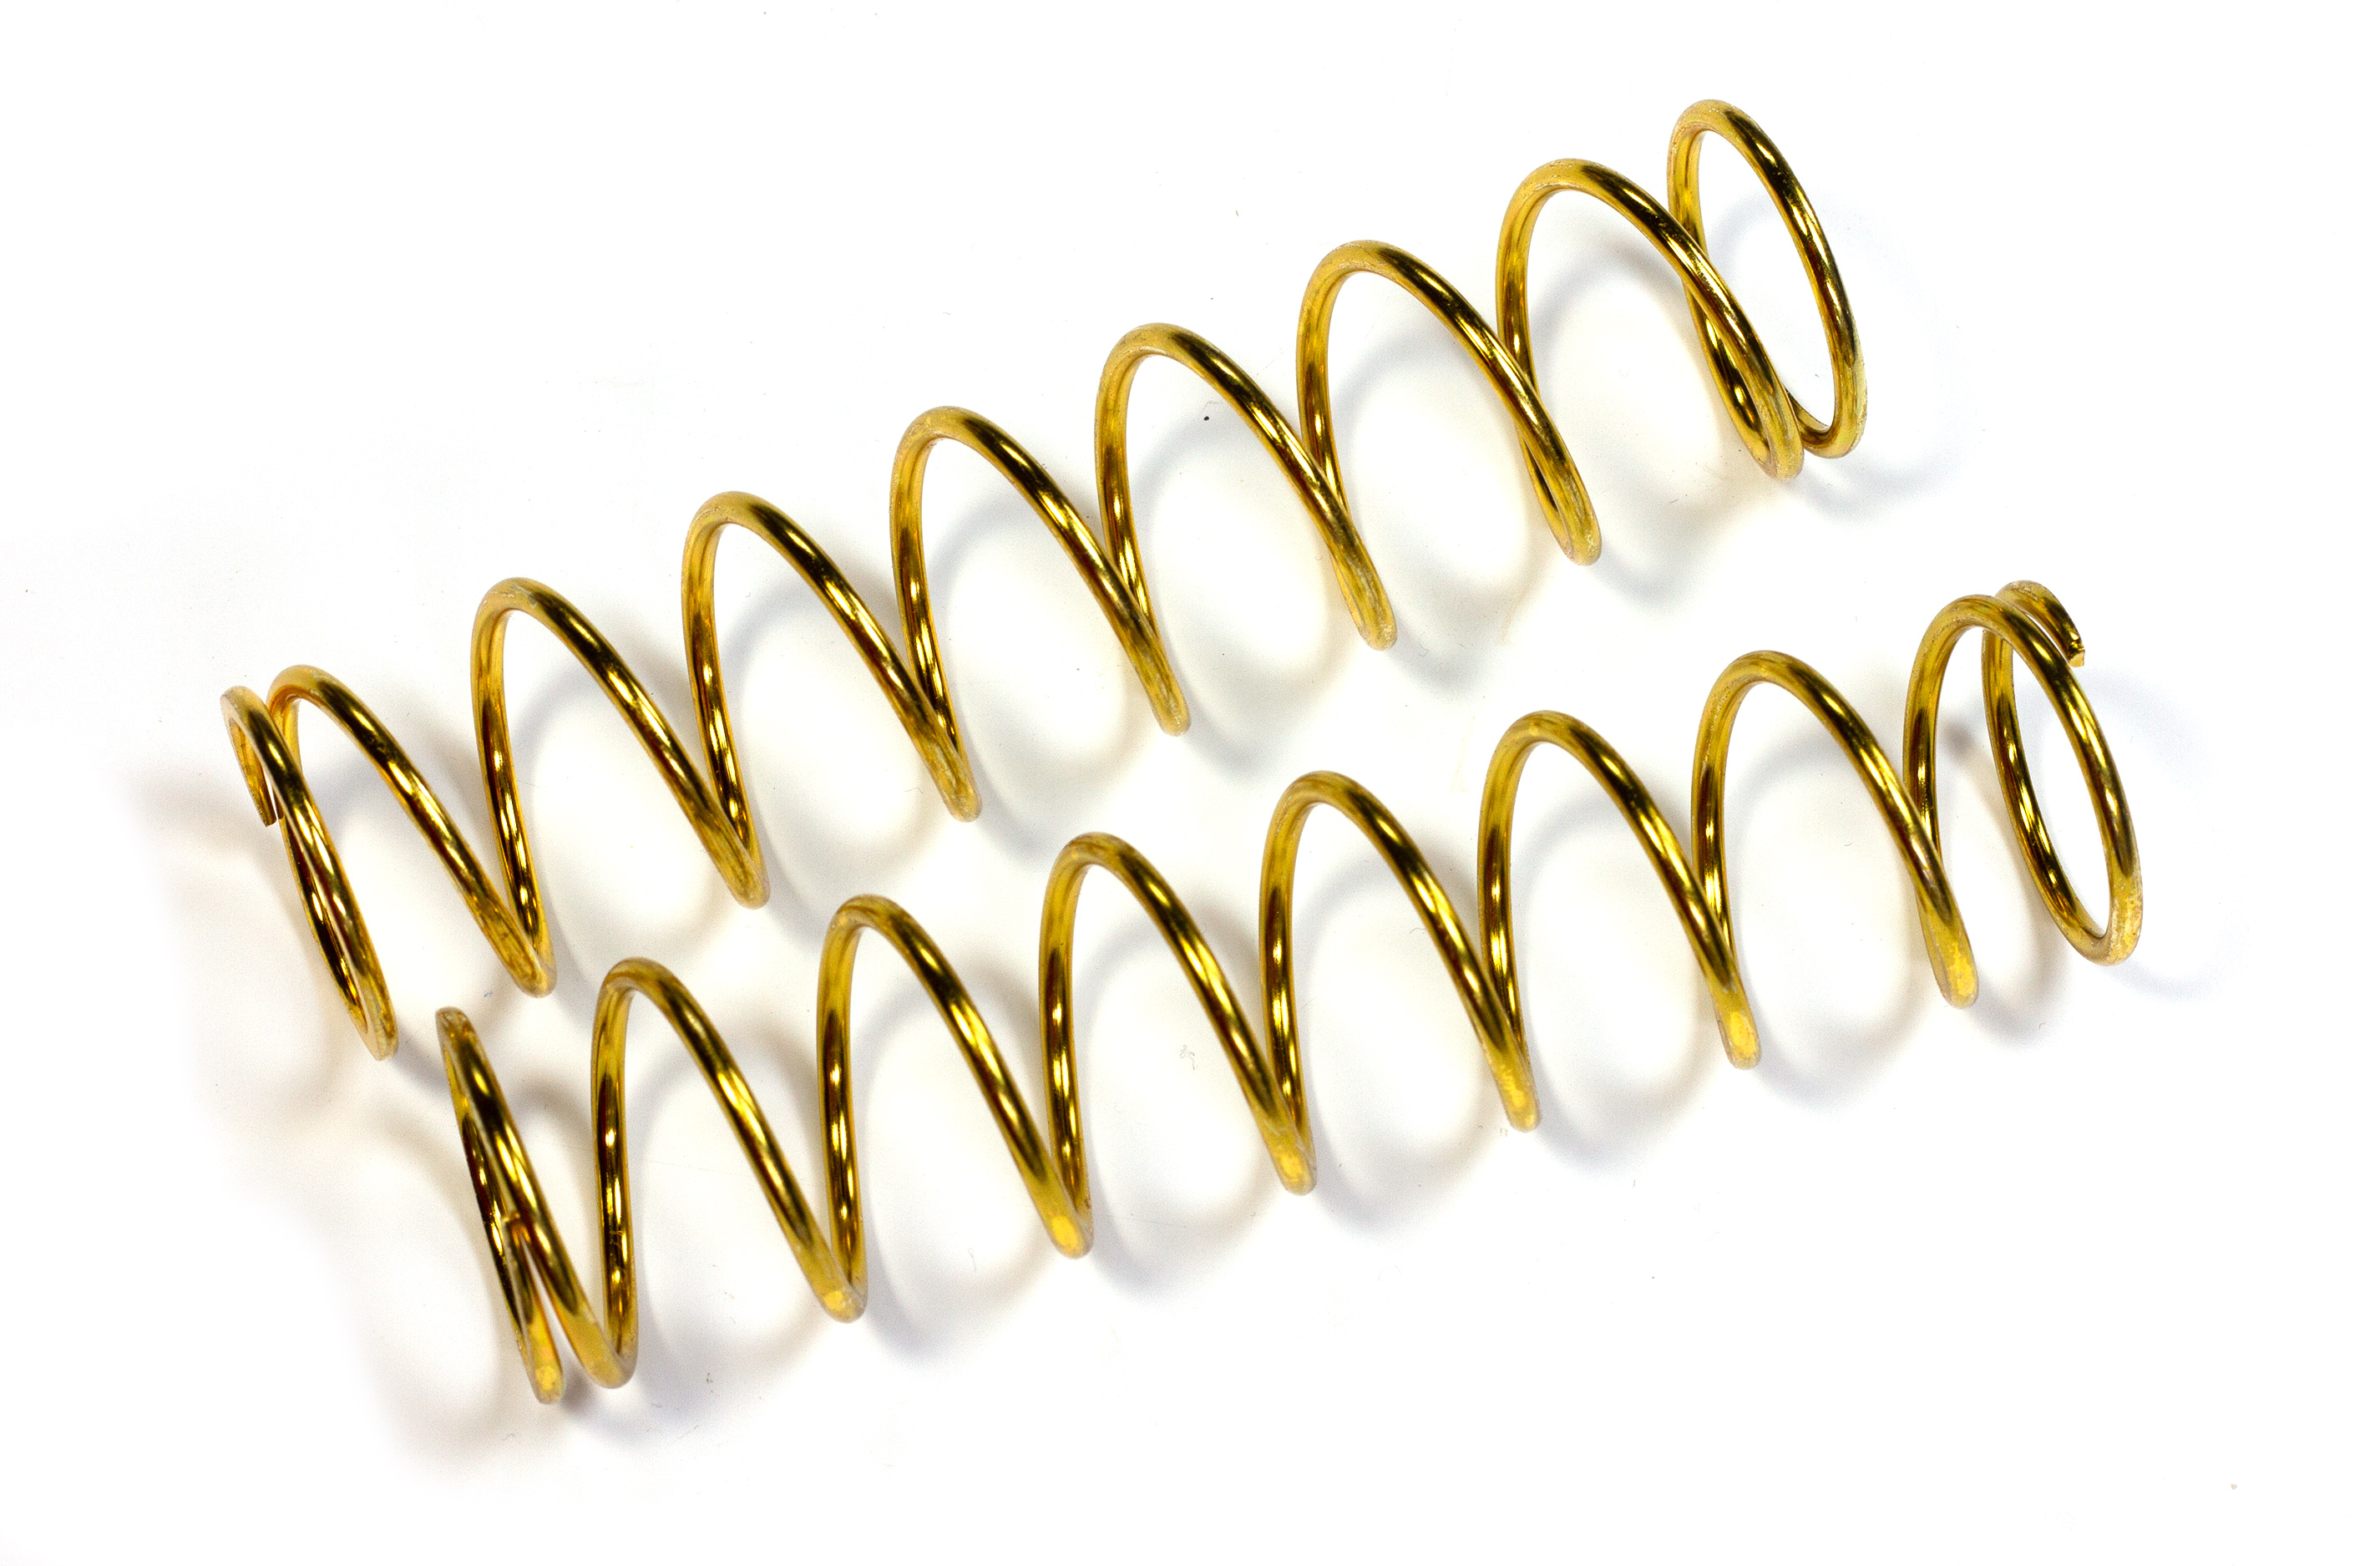 AKX187-01G GPM Shock spring front gold